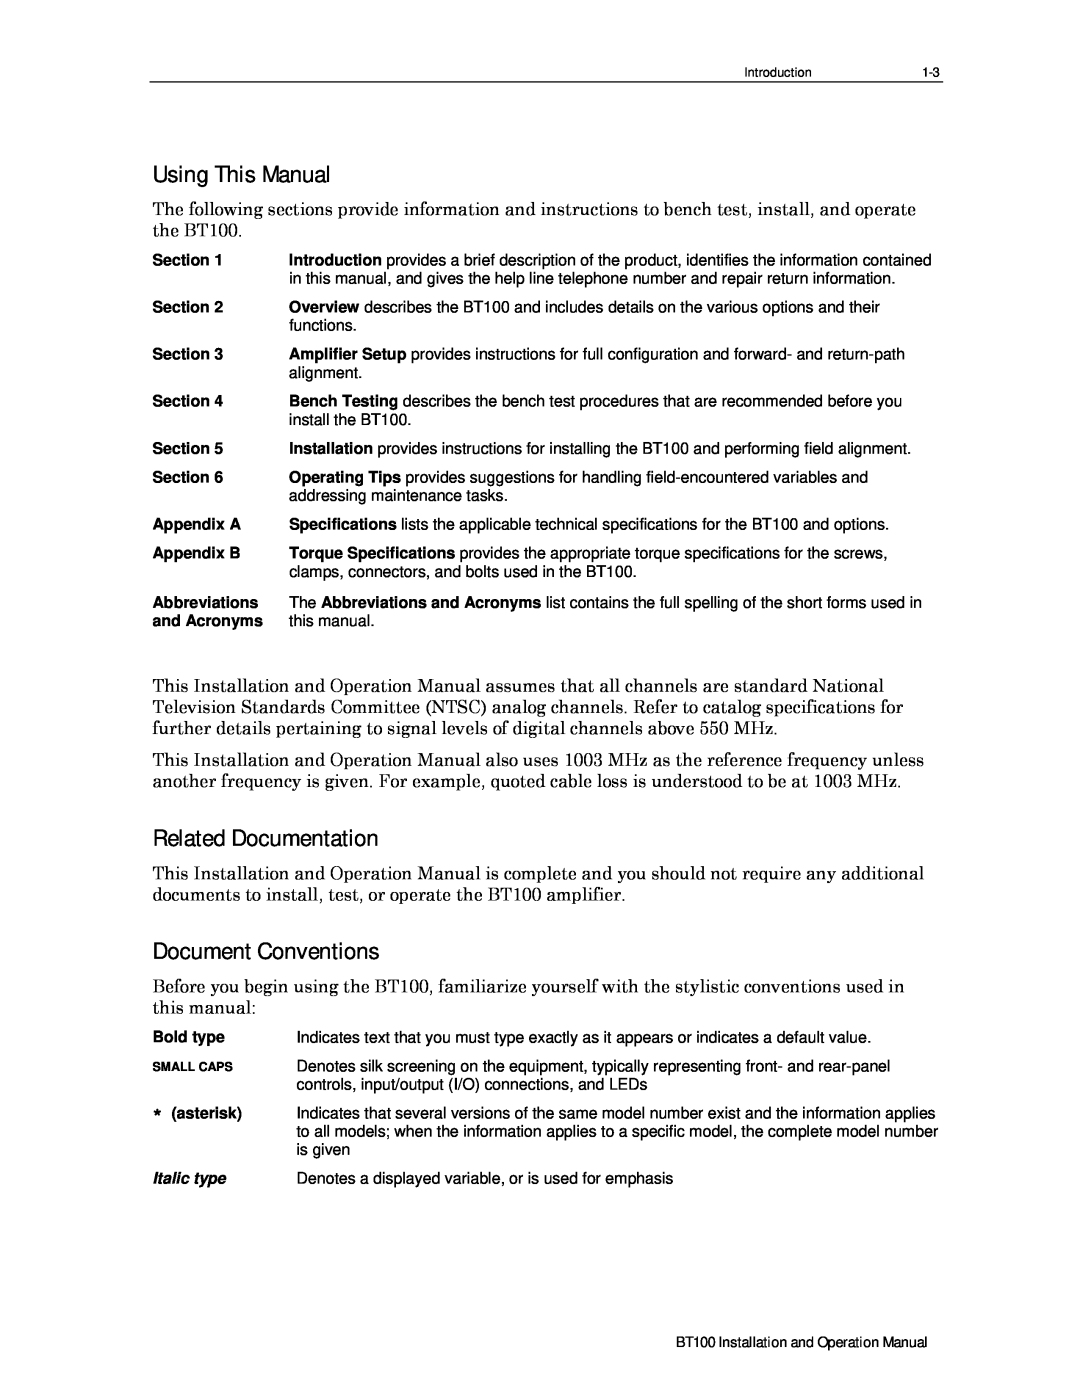 Motorola BT100 operation manual Using This Manual, Related Documentation, Document Conventions 